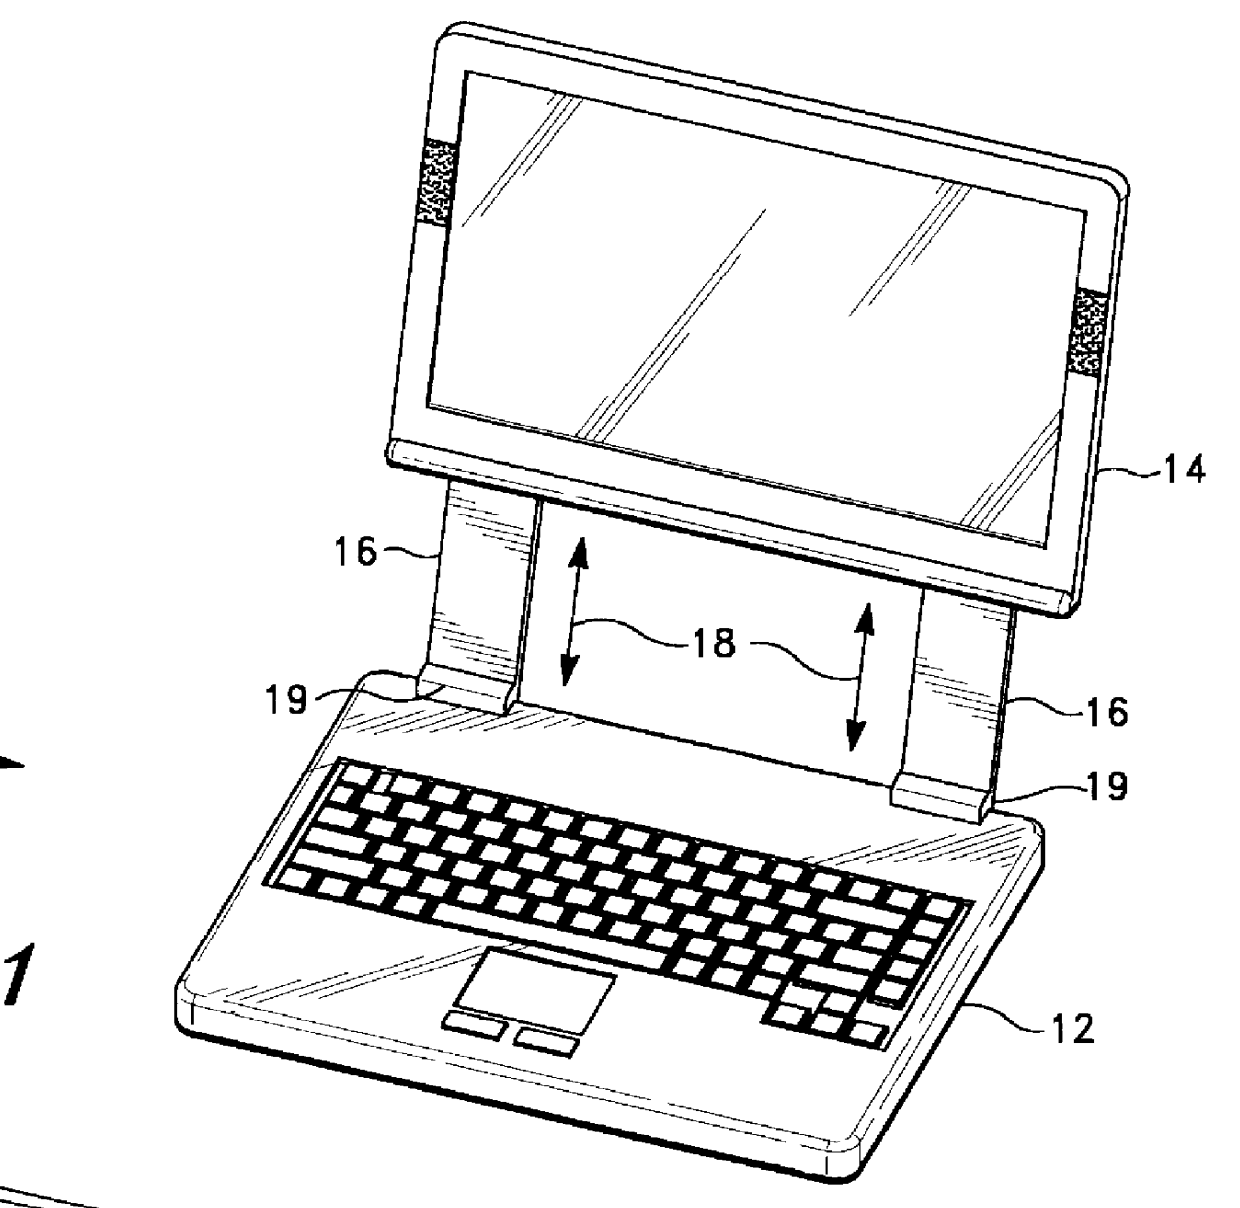 Flat panel display with adjustable height for a portable computer